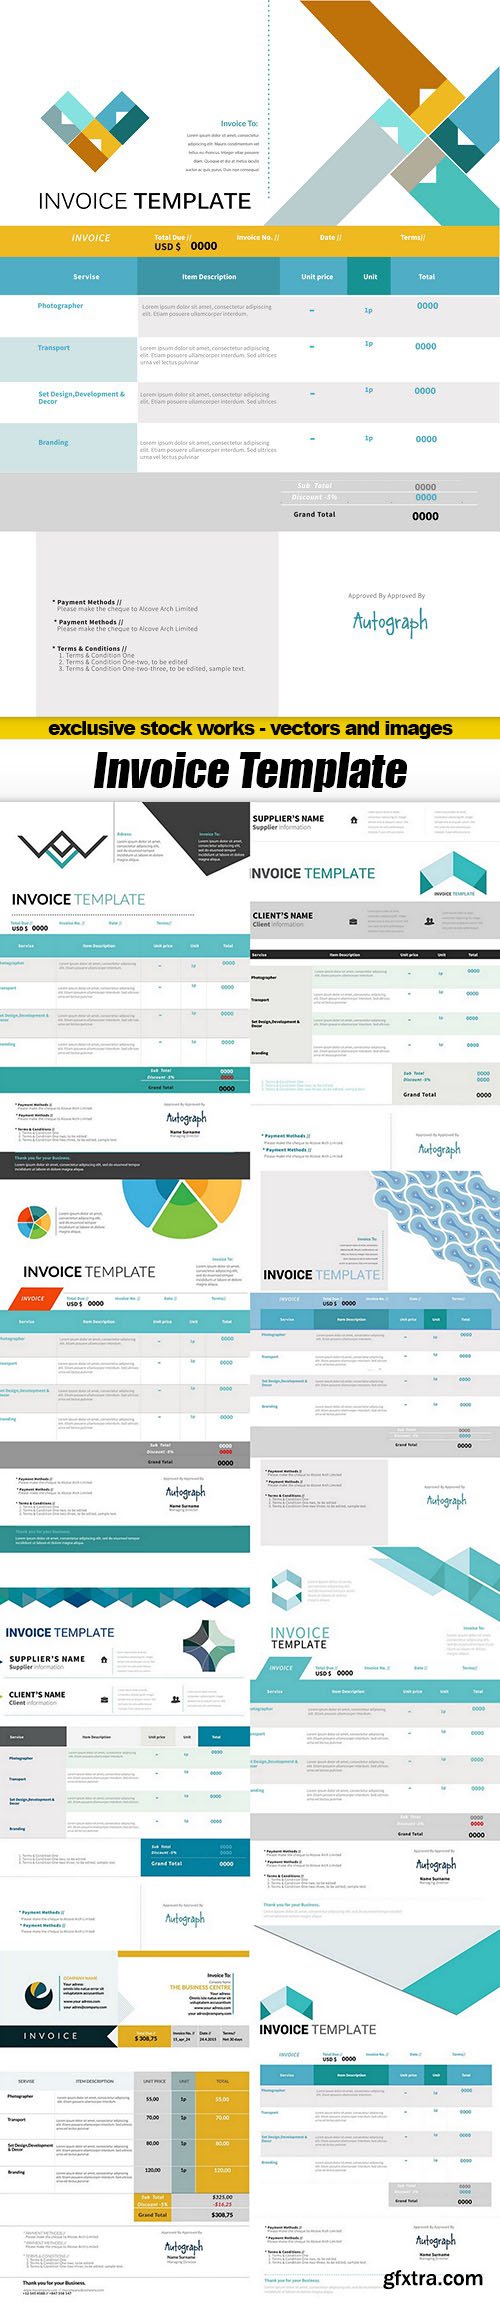 Invoice Template - 9xEPS